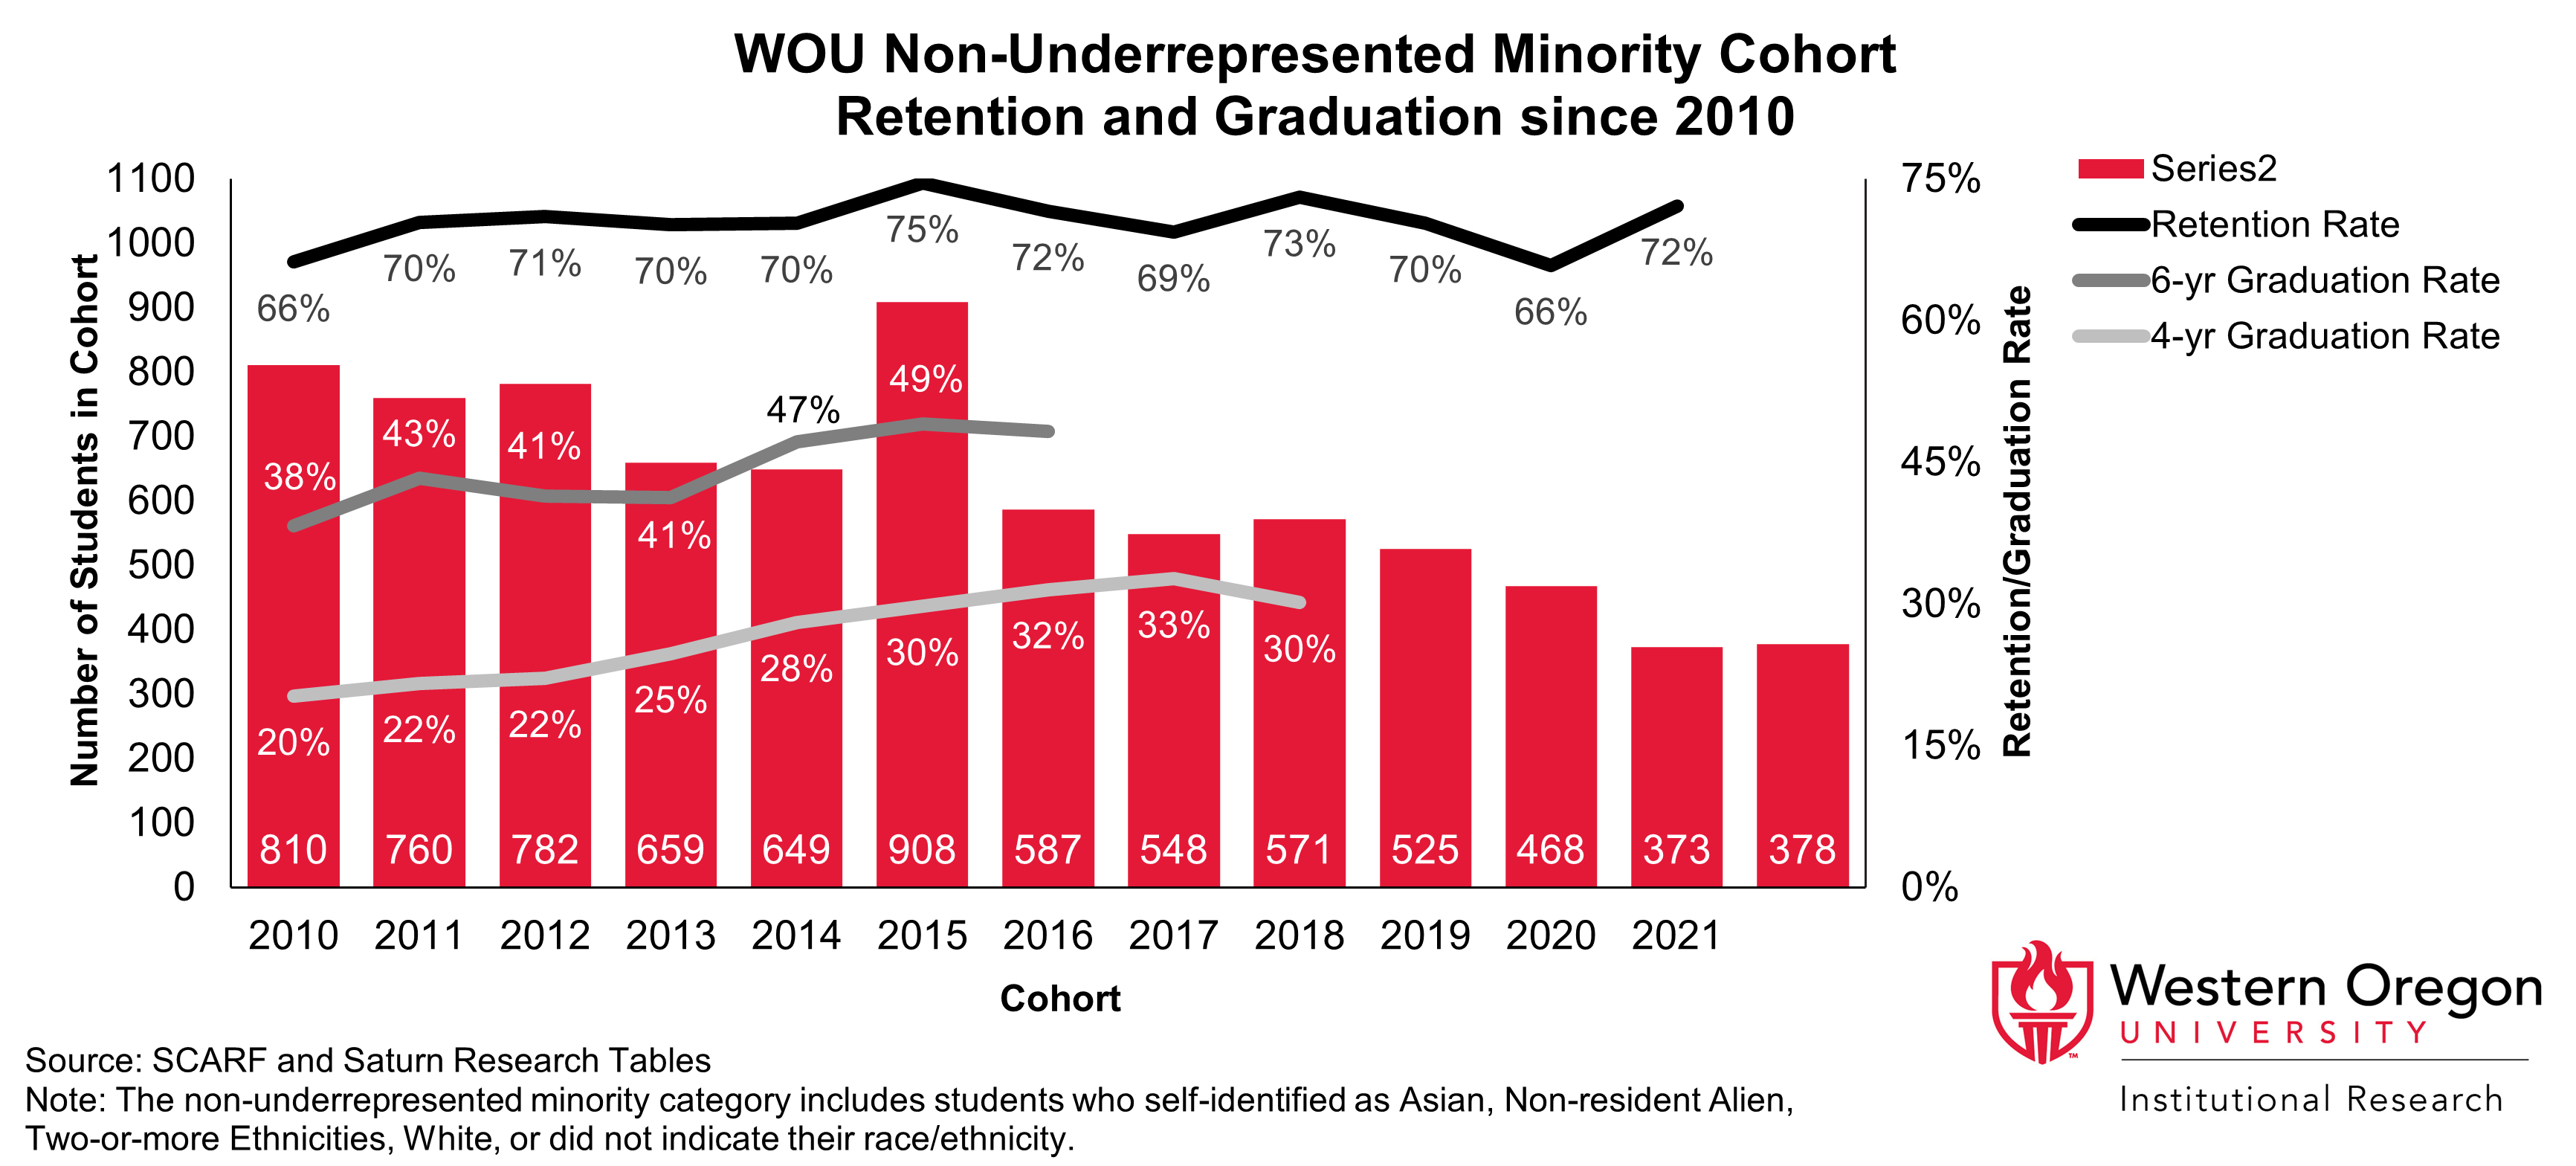 Bar and line graph of retention and 4- and 6-year graduation rates since 2010 for WOU students that are not from underrepresented minority groups, showing that graduation rates have been steadily increasing while retention rates have remained largely stable